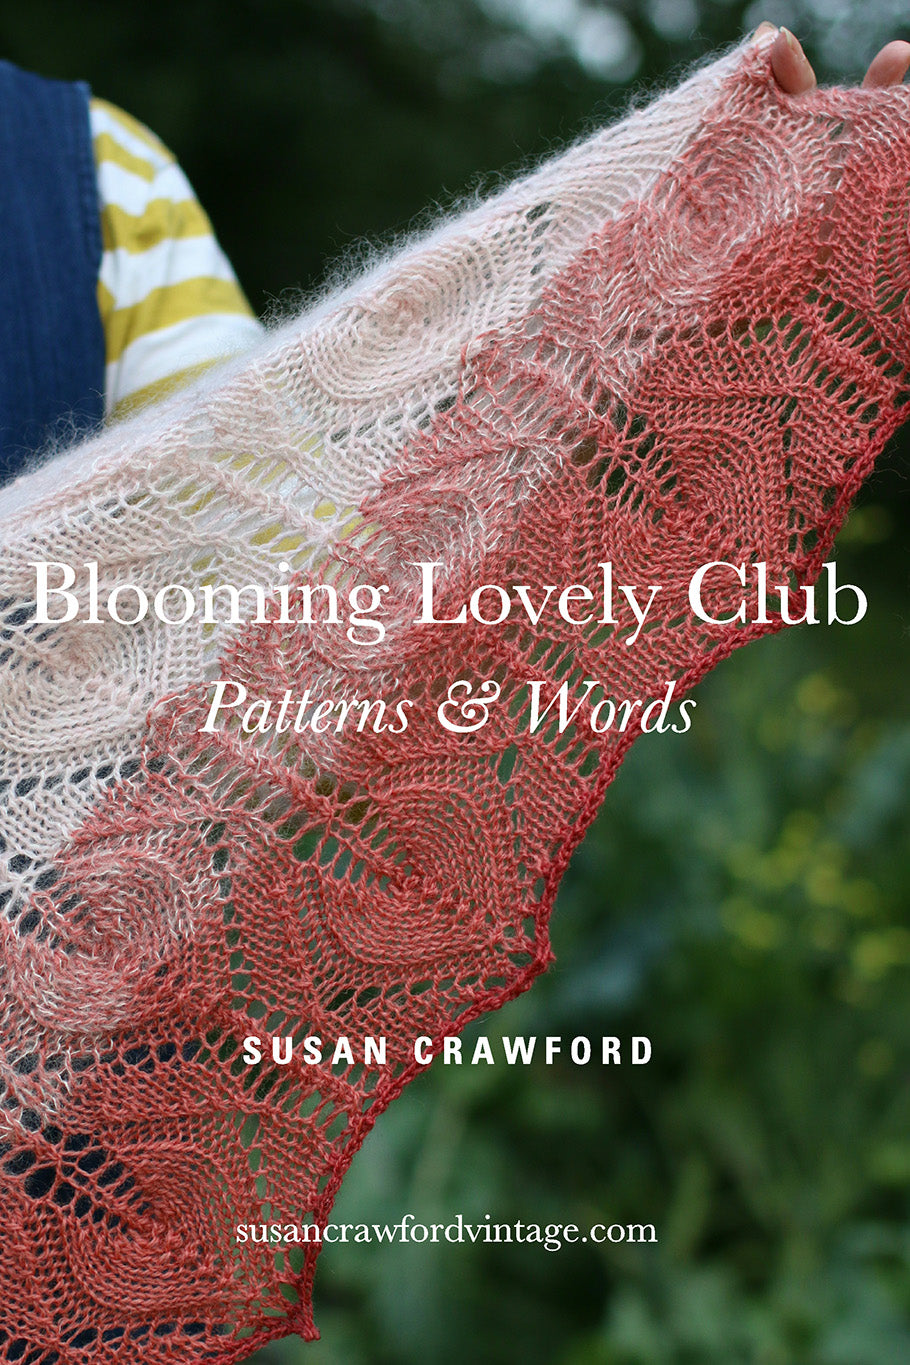 Blooming Lovely Club 2019